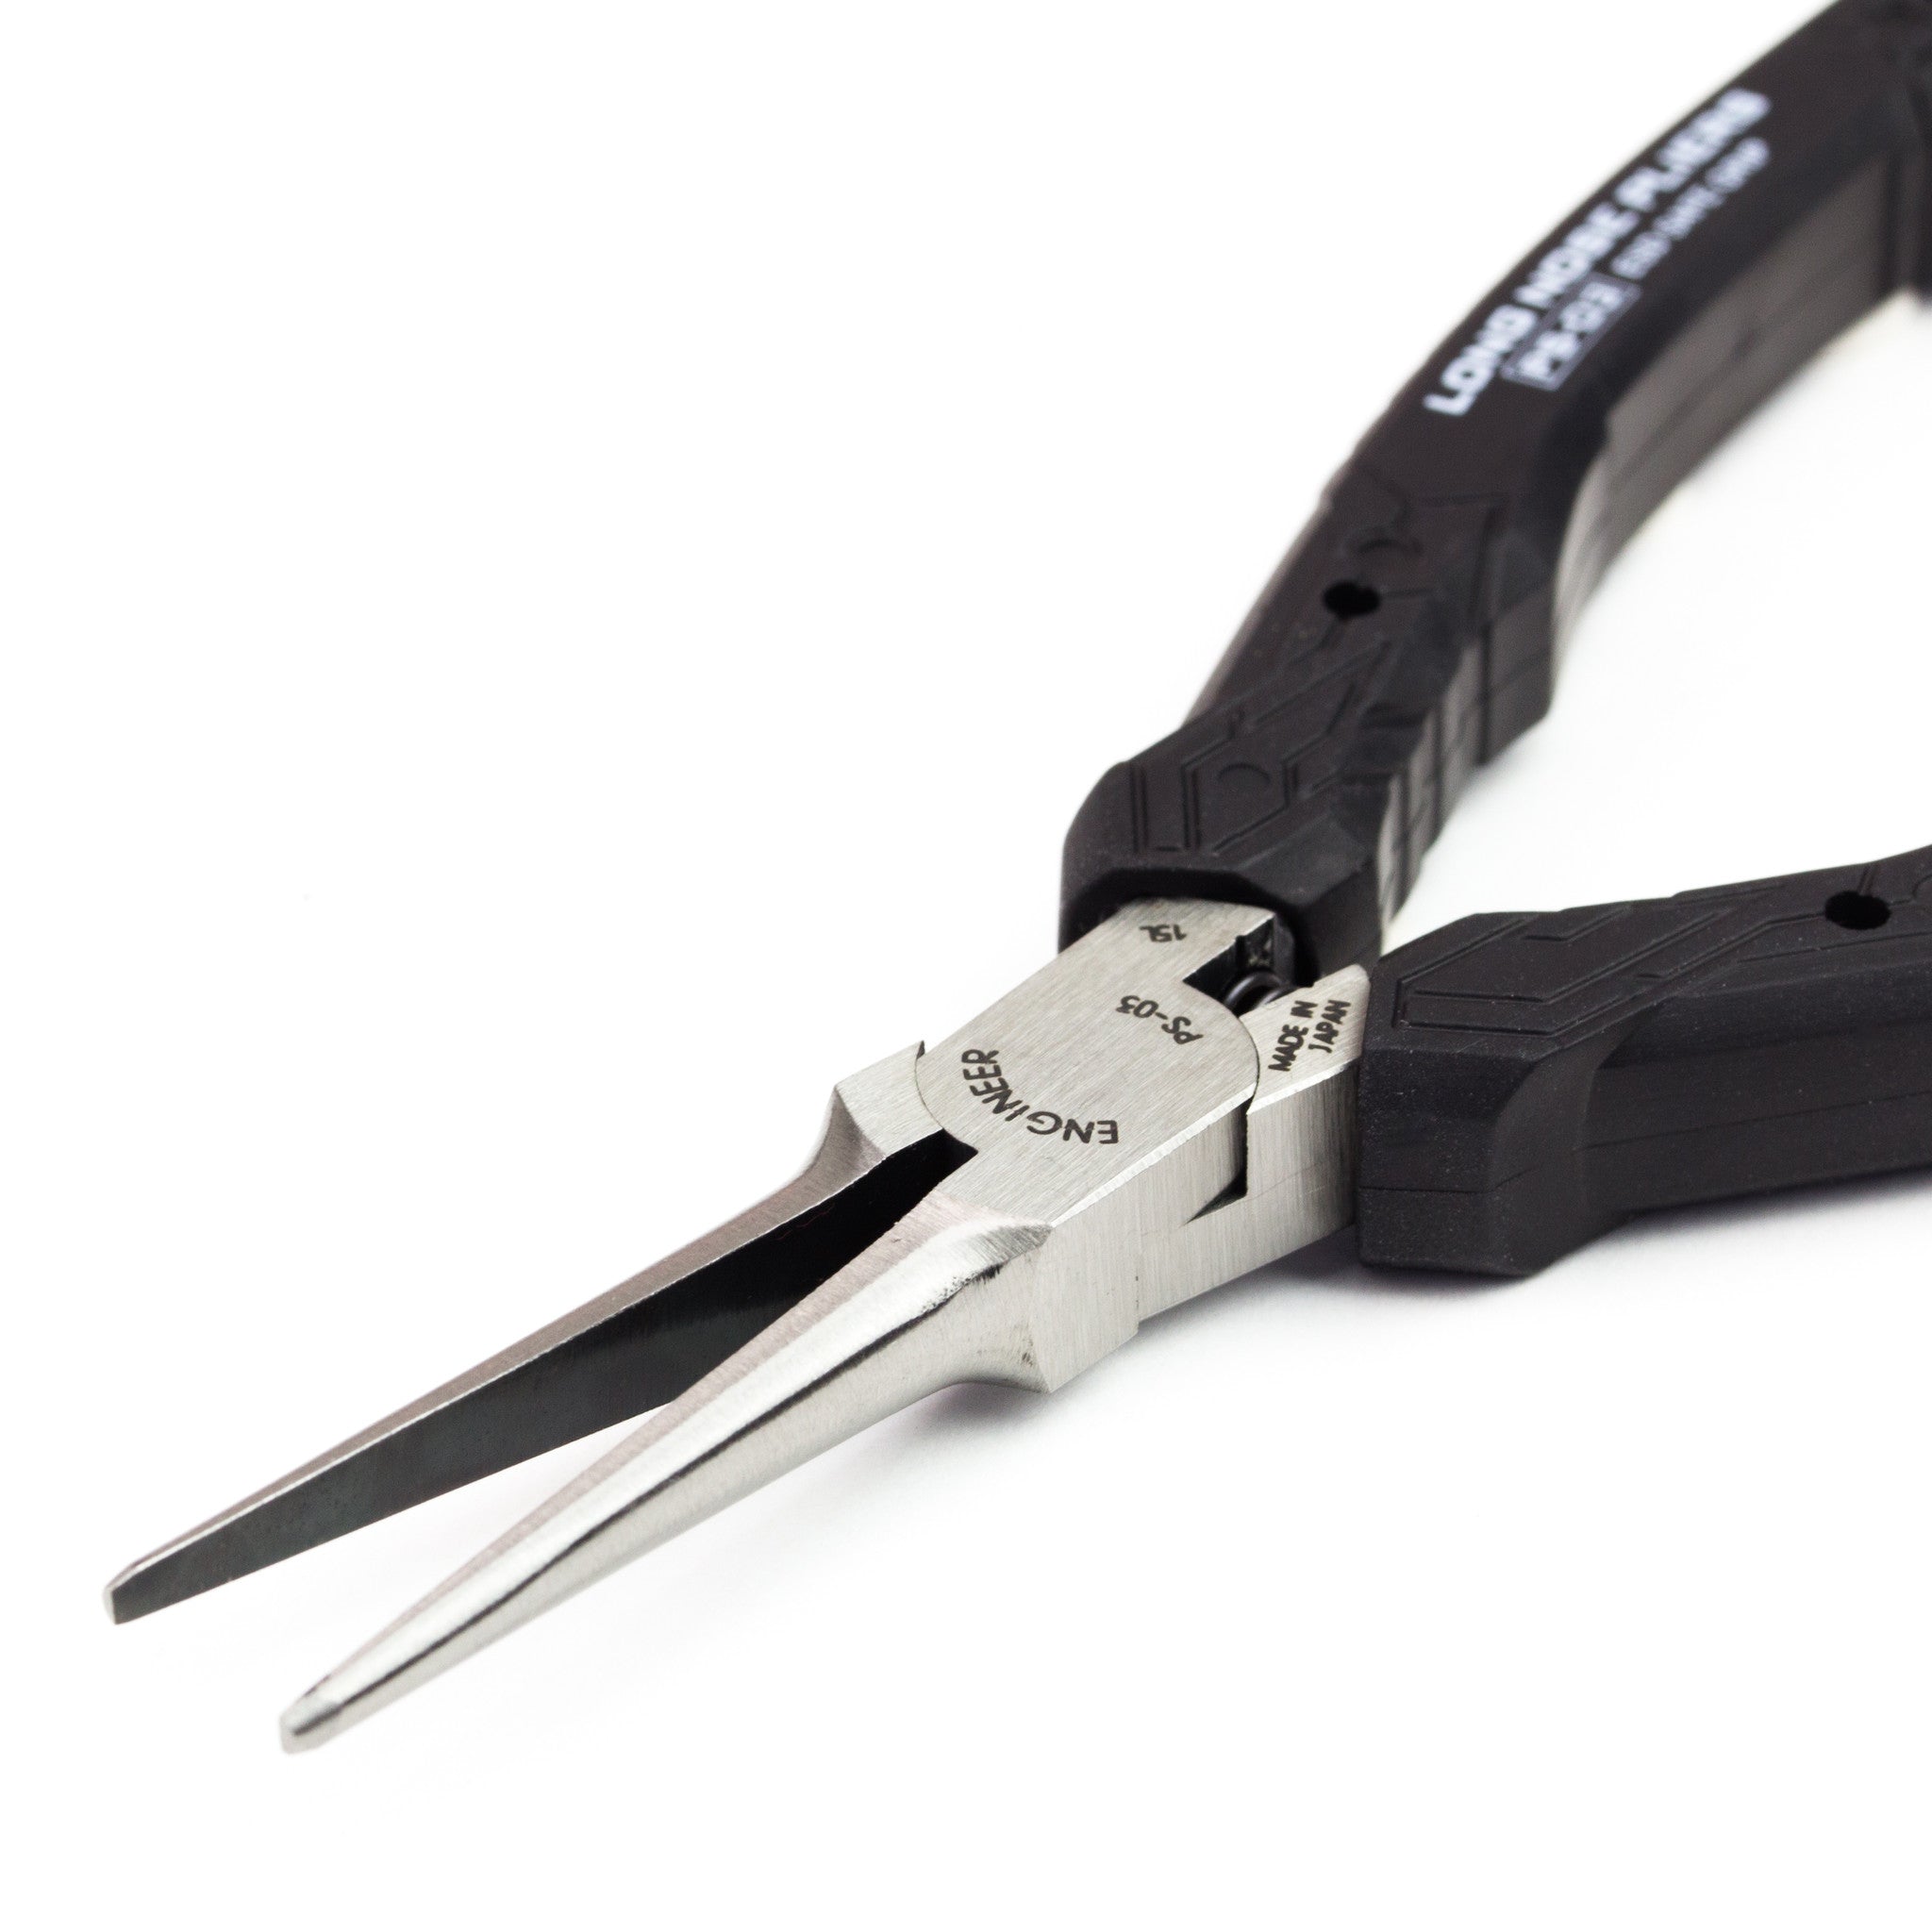 VAMPLIERS 5.5 Precision Tip Carbon Steel Mini Needle Nose Pliers with No  Serrated Jaws. ESD safe, ideal for precision work on SMD. Made in Japan